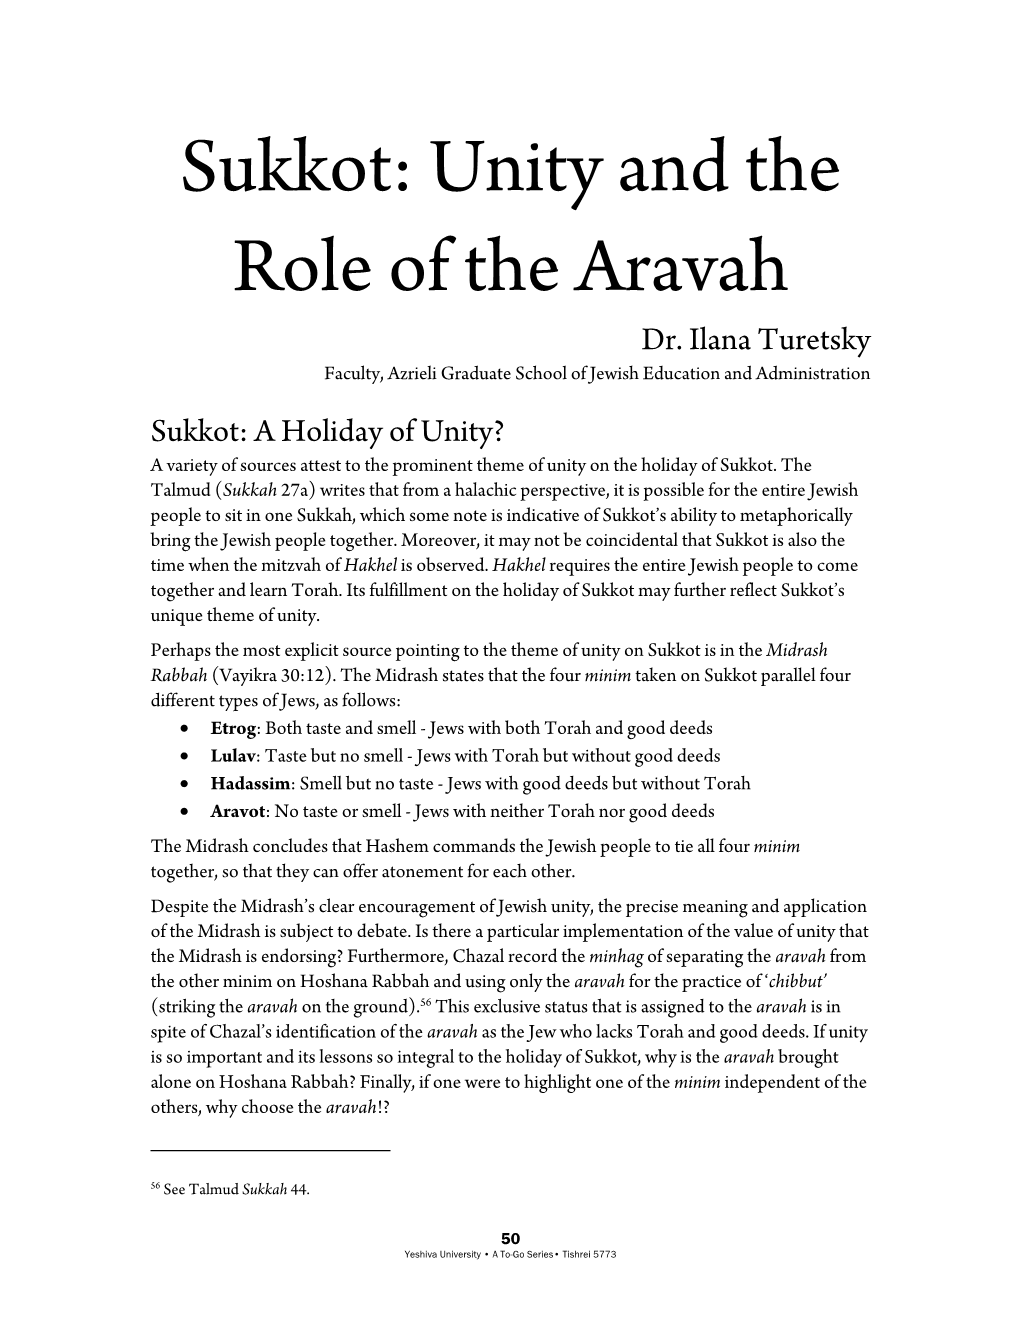 Sukkot: Unity and the Role of the Aravah Dr